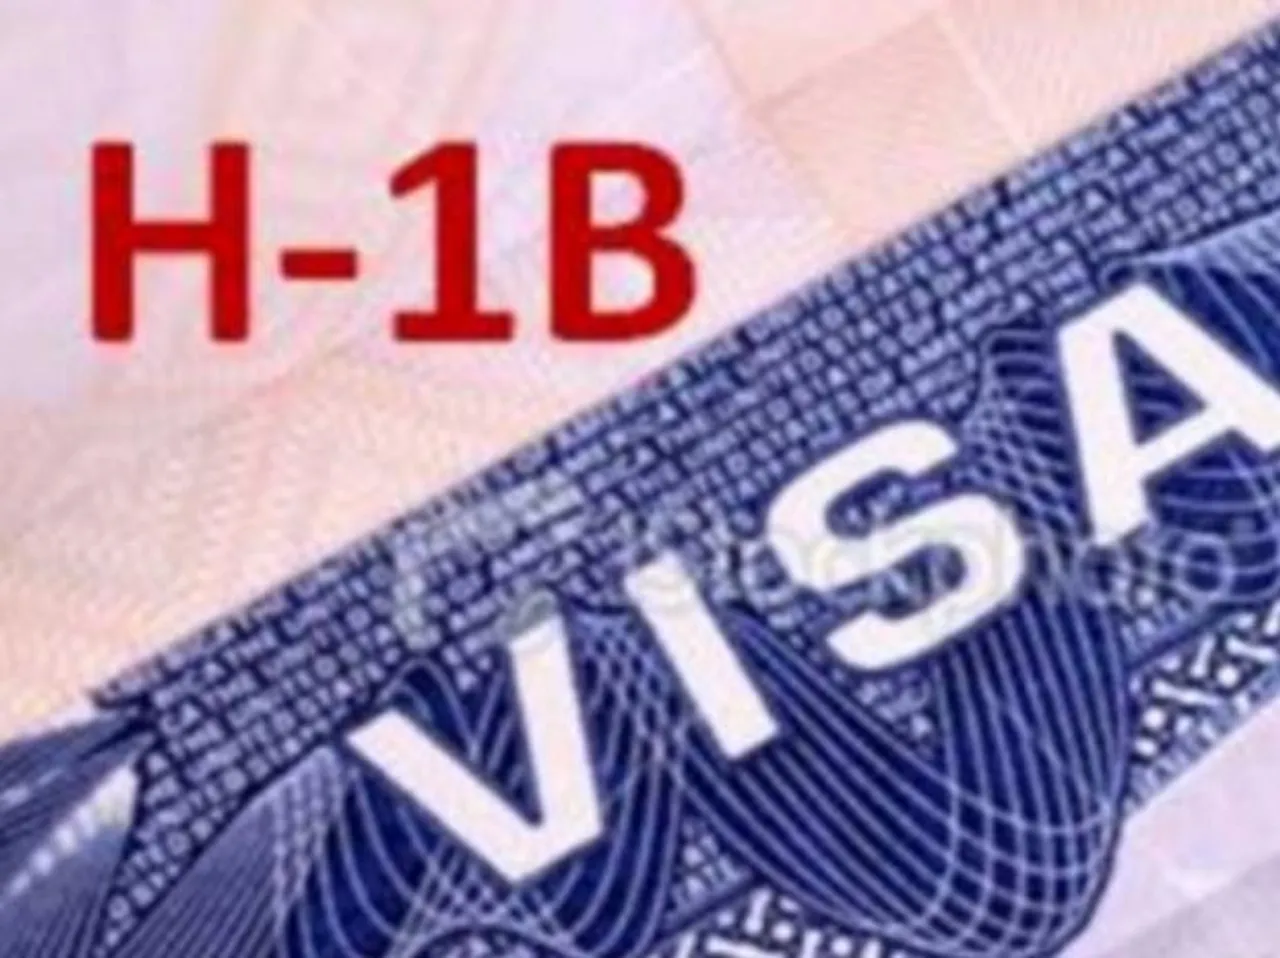 Indian-origin immigration manager found guilty in H1-B tech visa fraud case